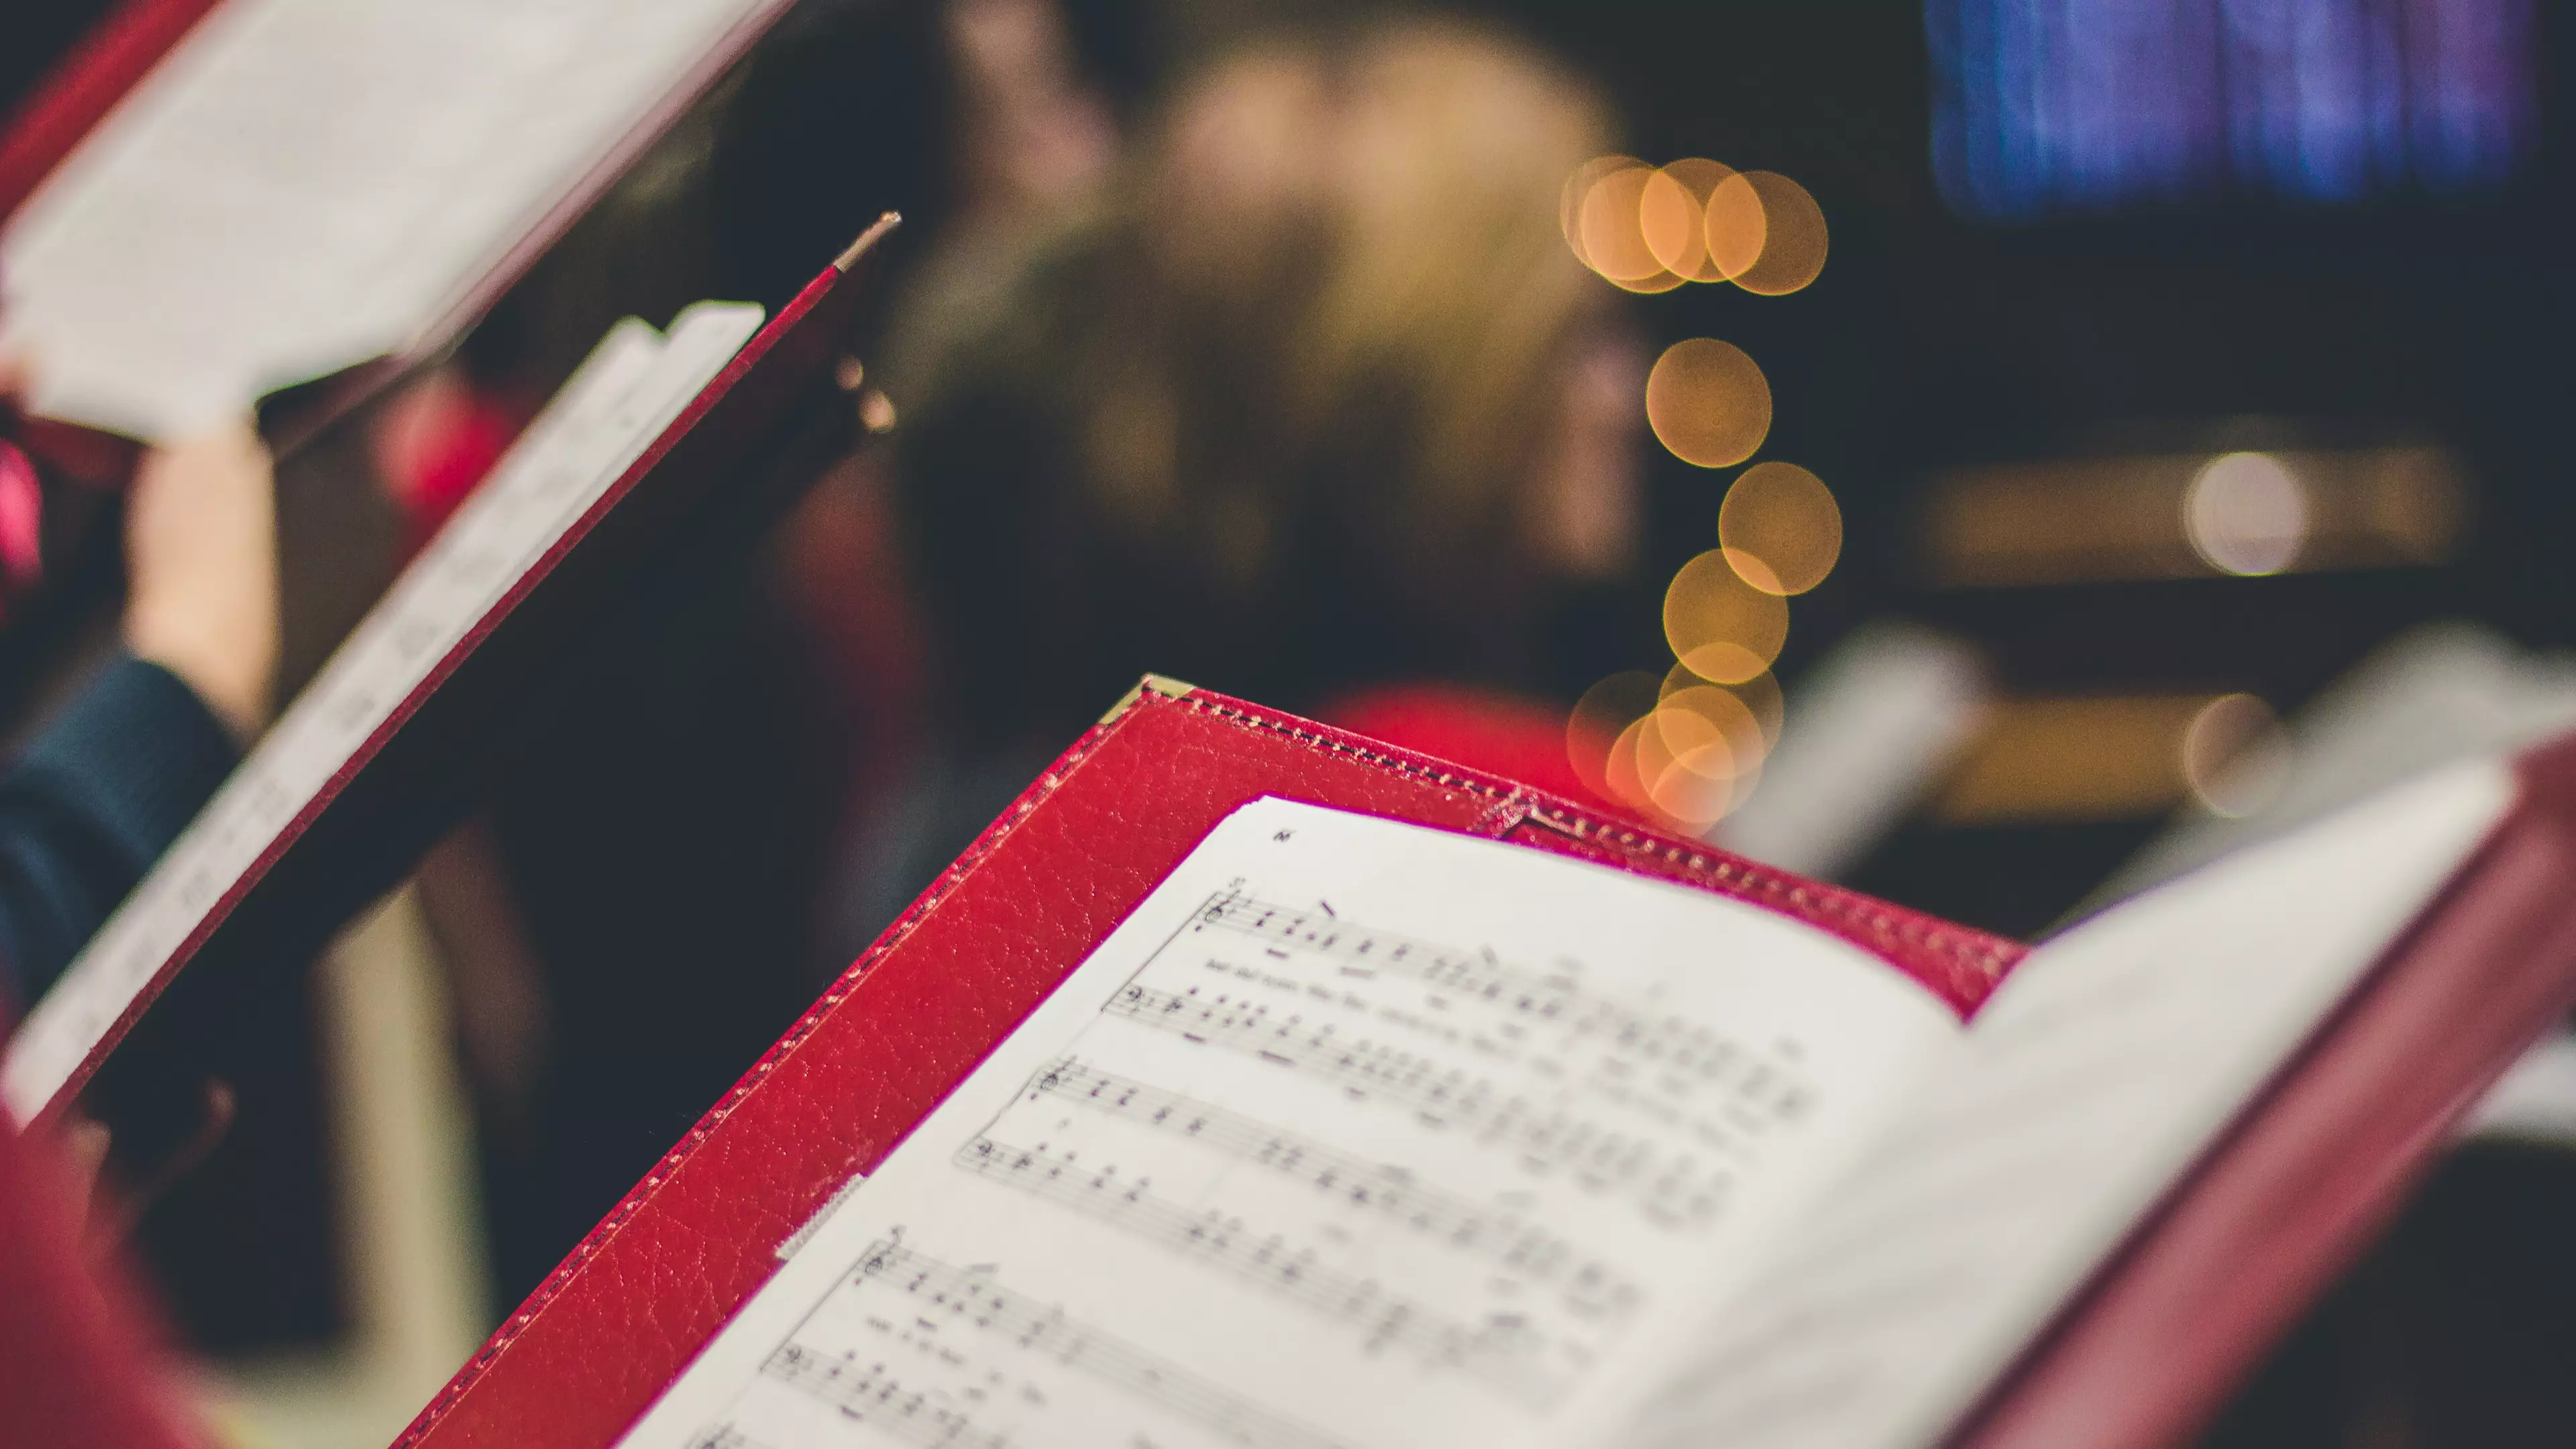 You Can Live Stream An Epic Carol Concert On Christmas Eve